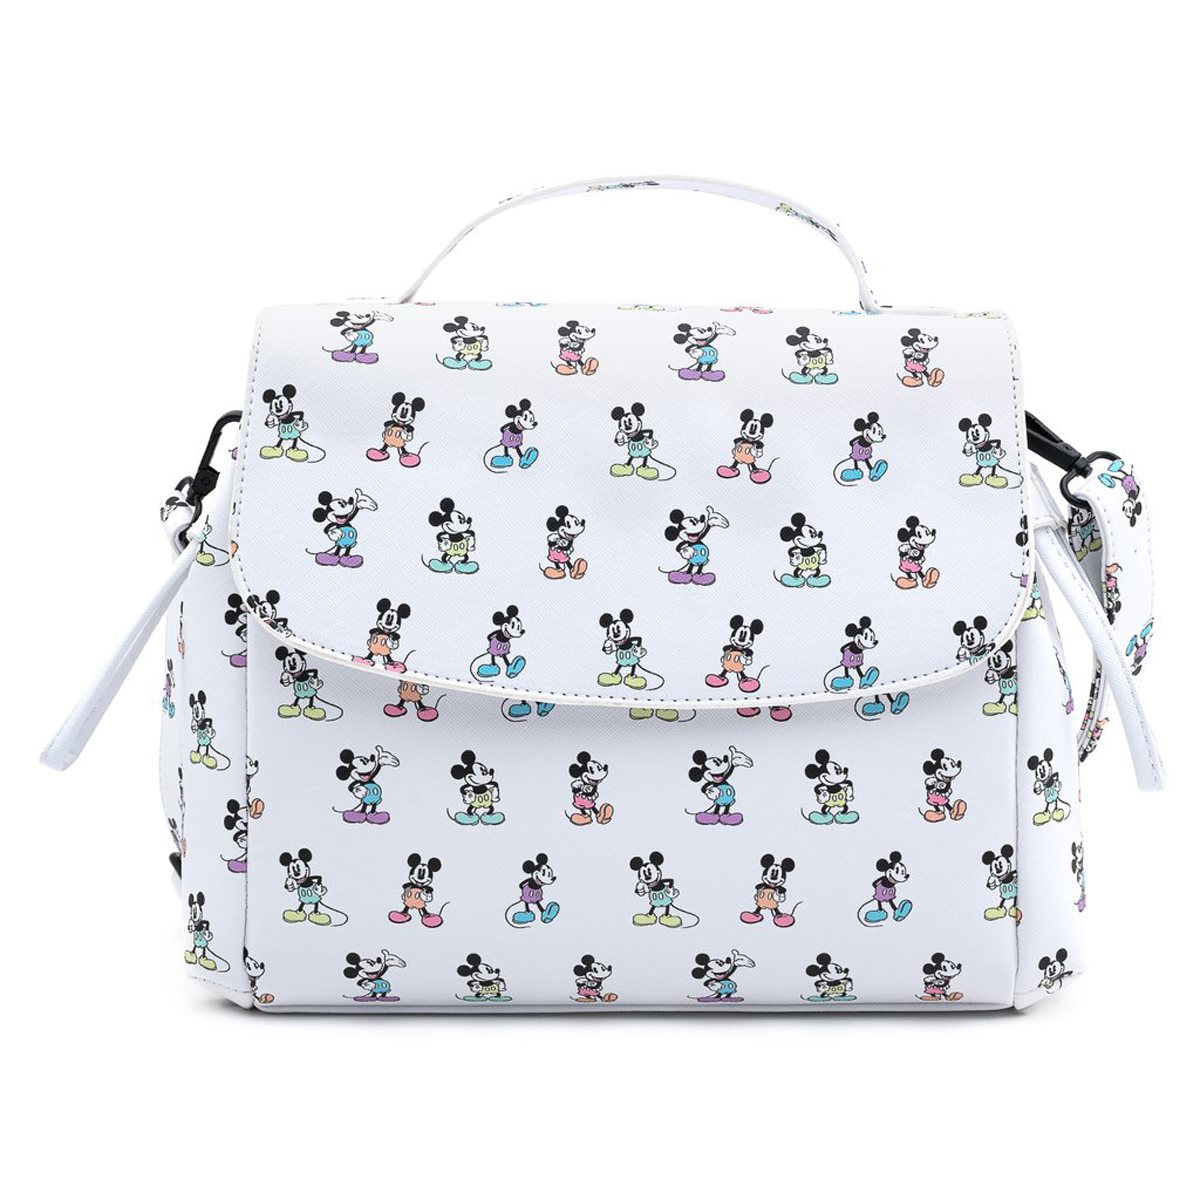 Buckle-Down Disney Mickey Mouse Smiling Up Pose Cross Body Bag